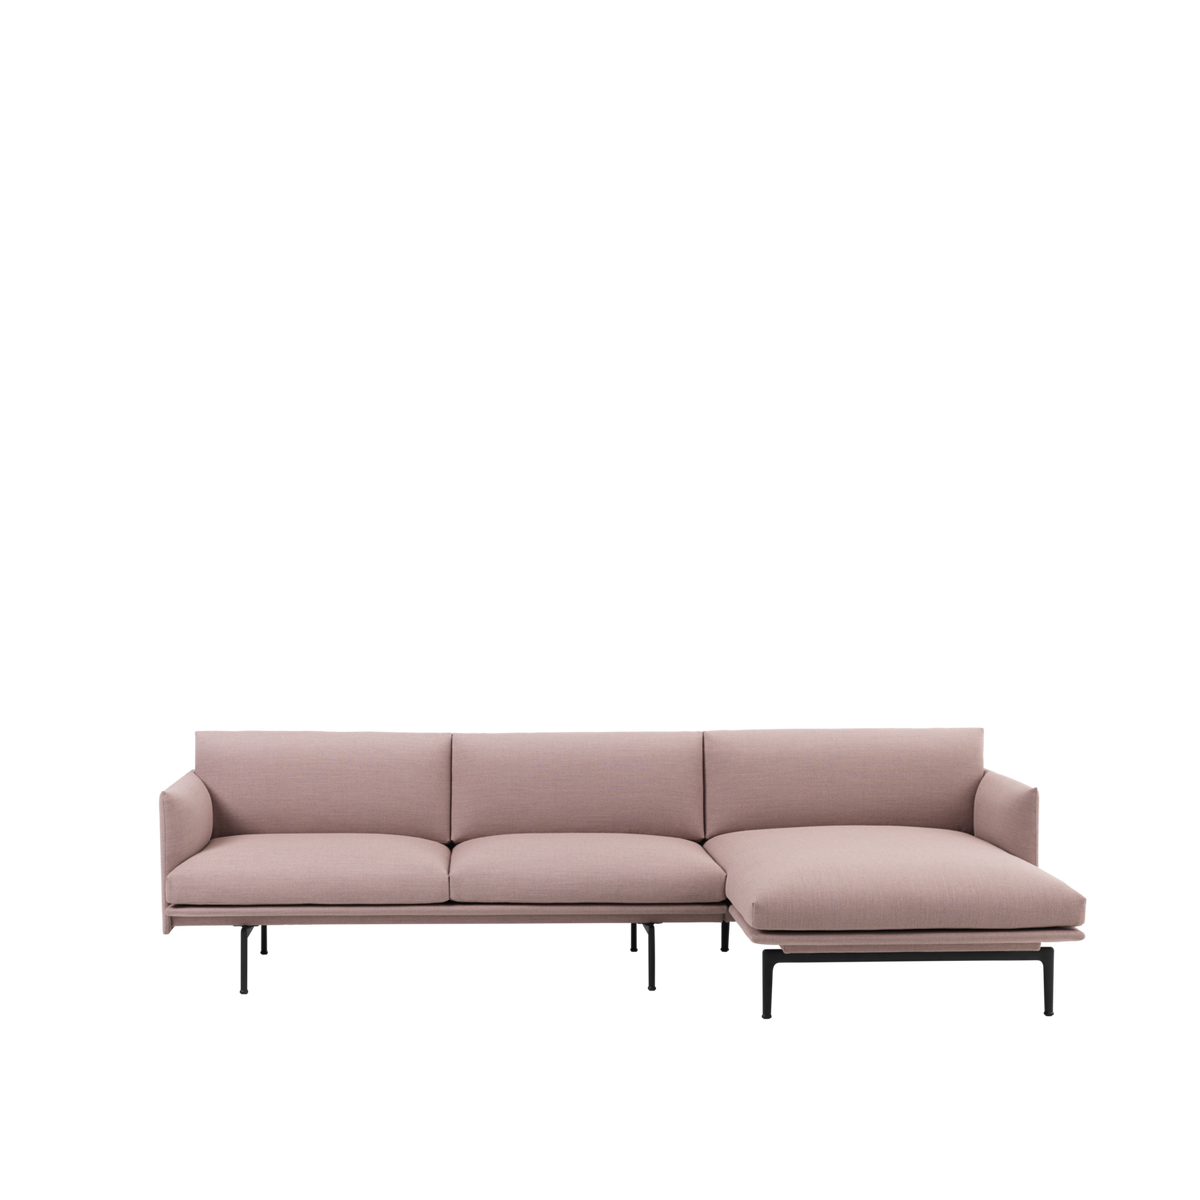 Outline Sofa Chaise Lounge by Muuto